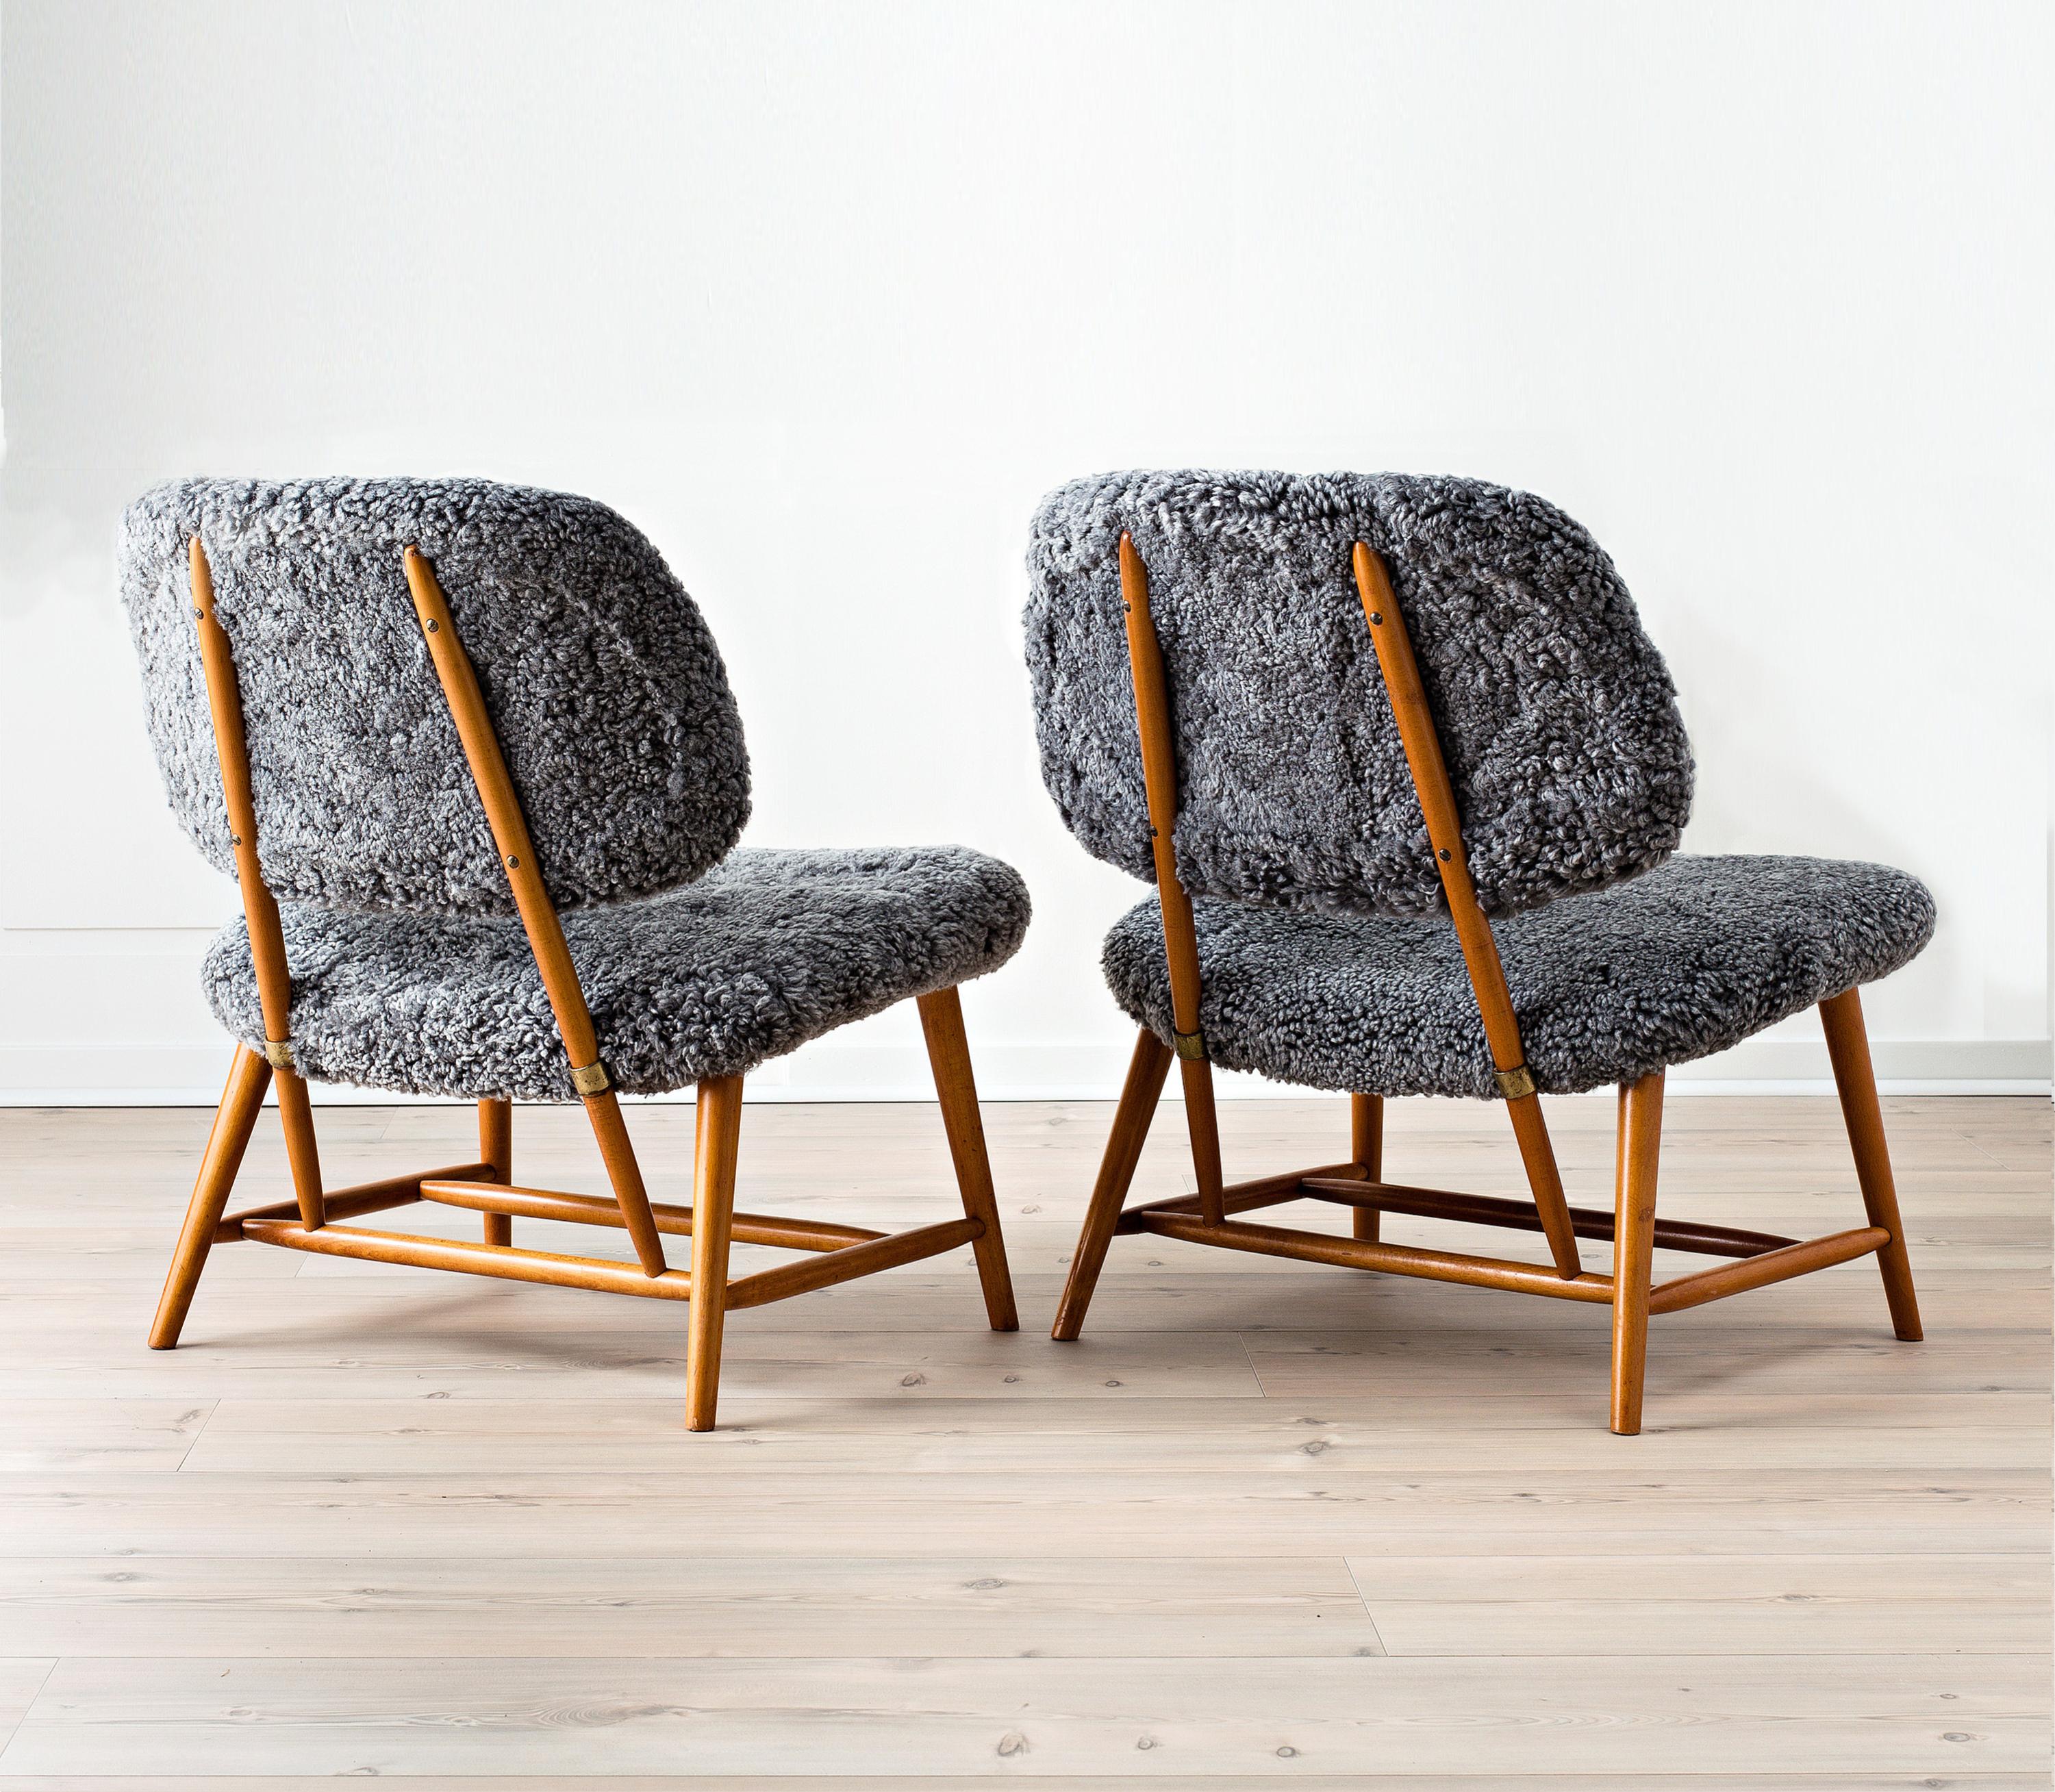 Pair of lounge chair model TeVe designed by Swedish Alf Svensson in 1953 for Ljungs Industrier. Frame in stained beech and brass. Upholstered seat and back with grey toned sheepskin.